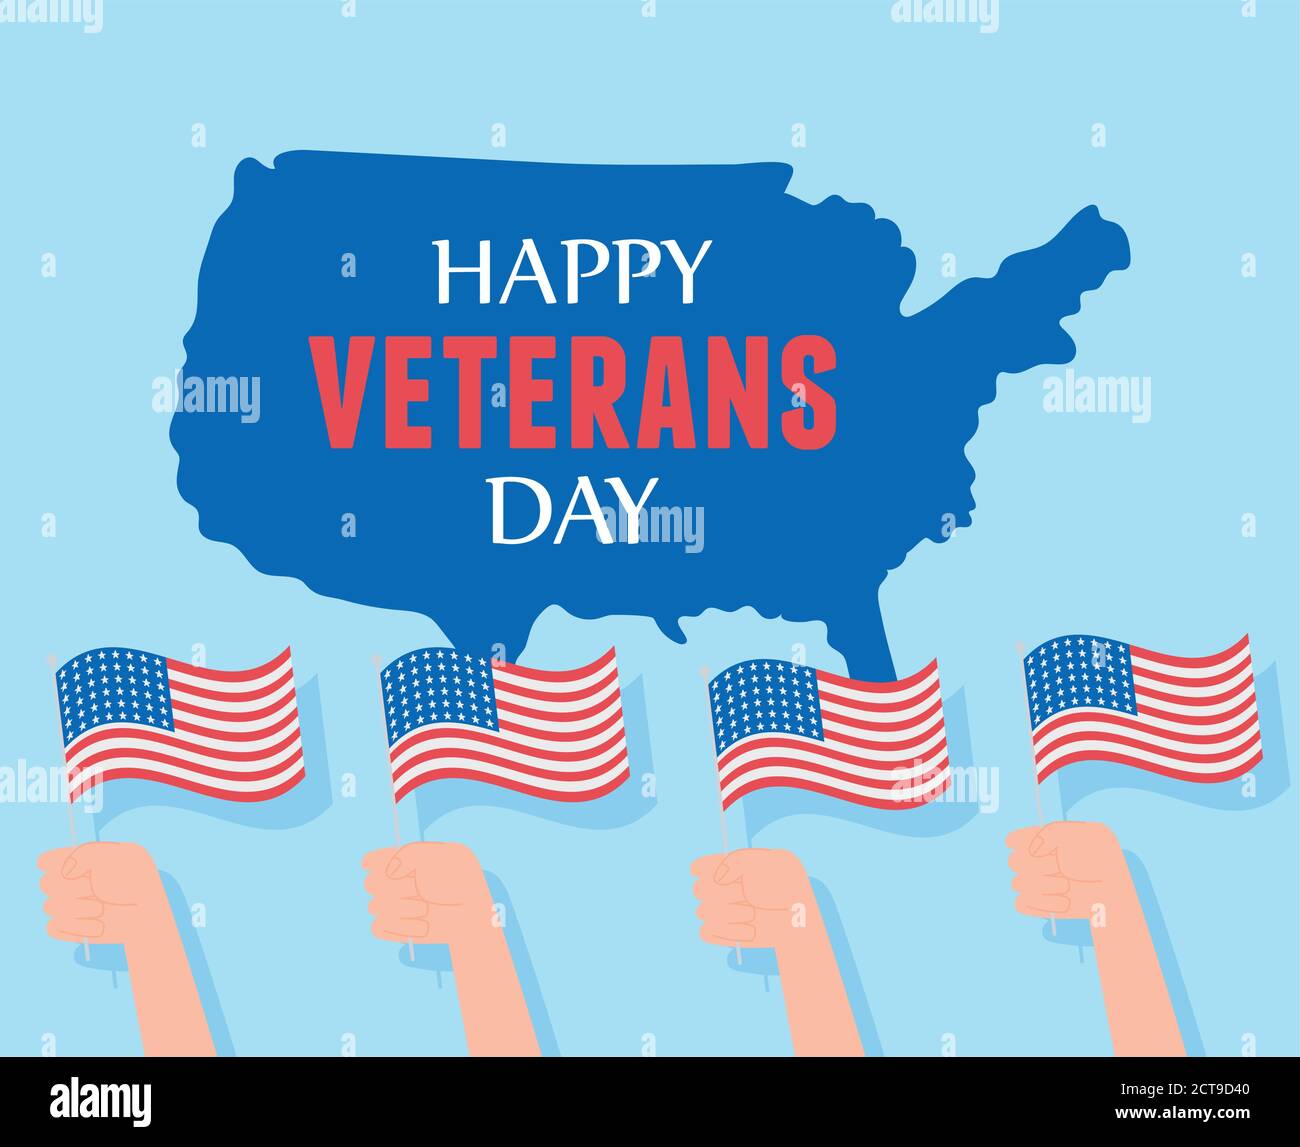 happy veterans day, hands with american flags and map, US military armed forces soldier vector illustration Stock Vector